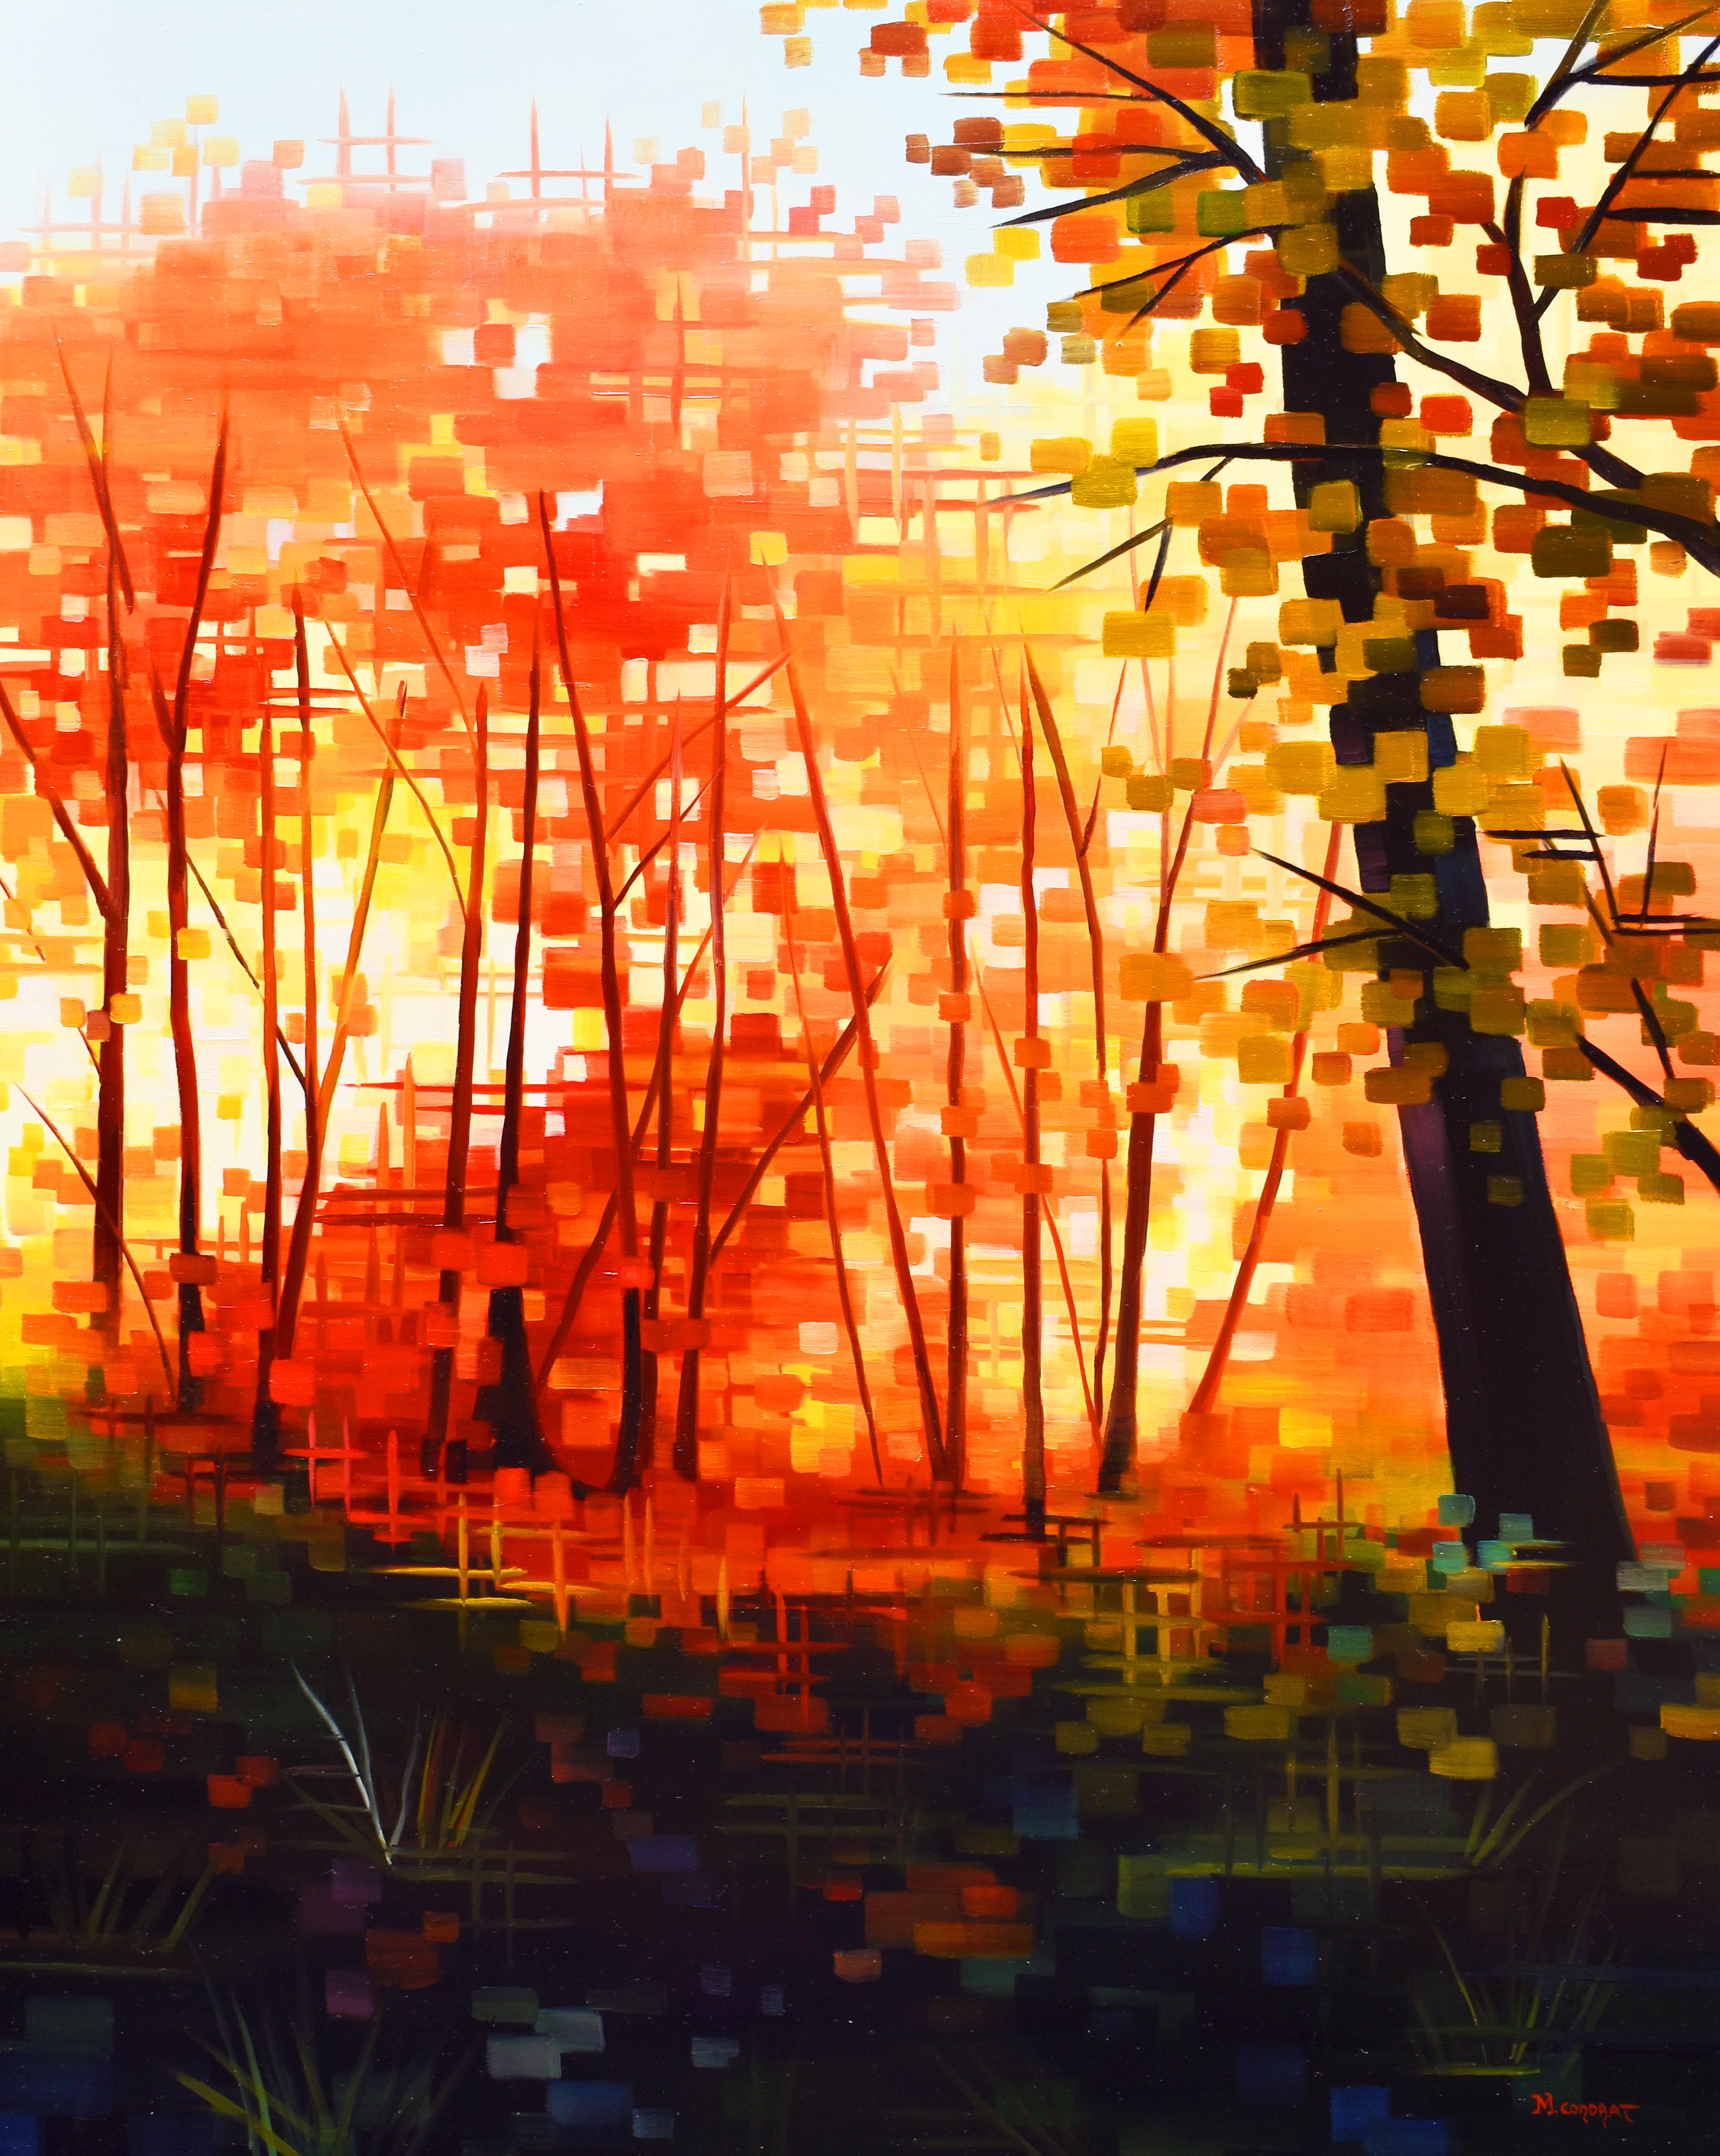 Michelle Condrat Landscape Painting - "The Lucky Grove, " Landscape Oil painting in Autumn